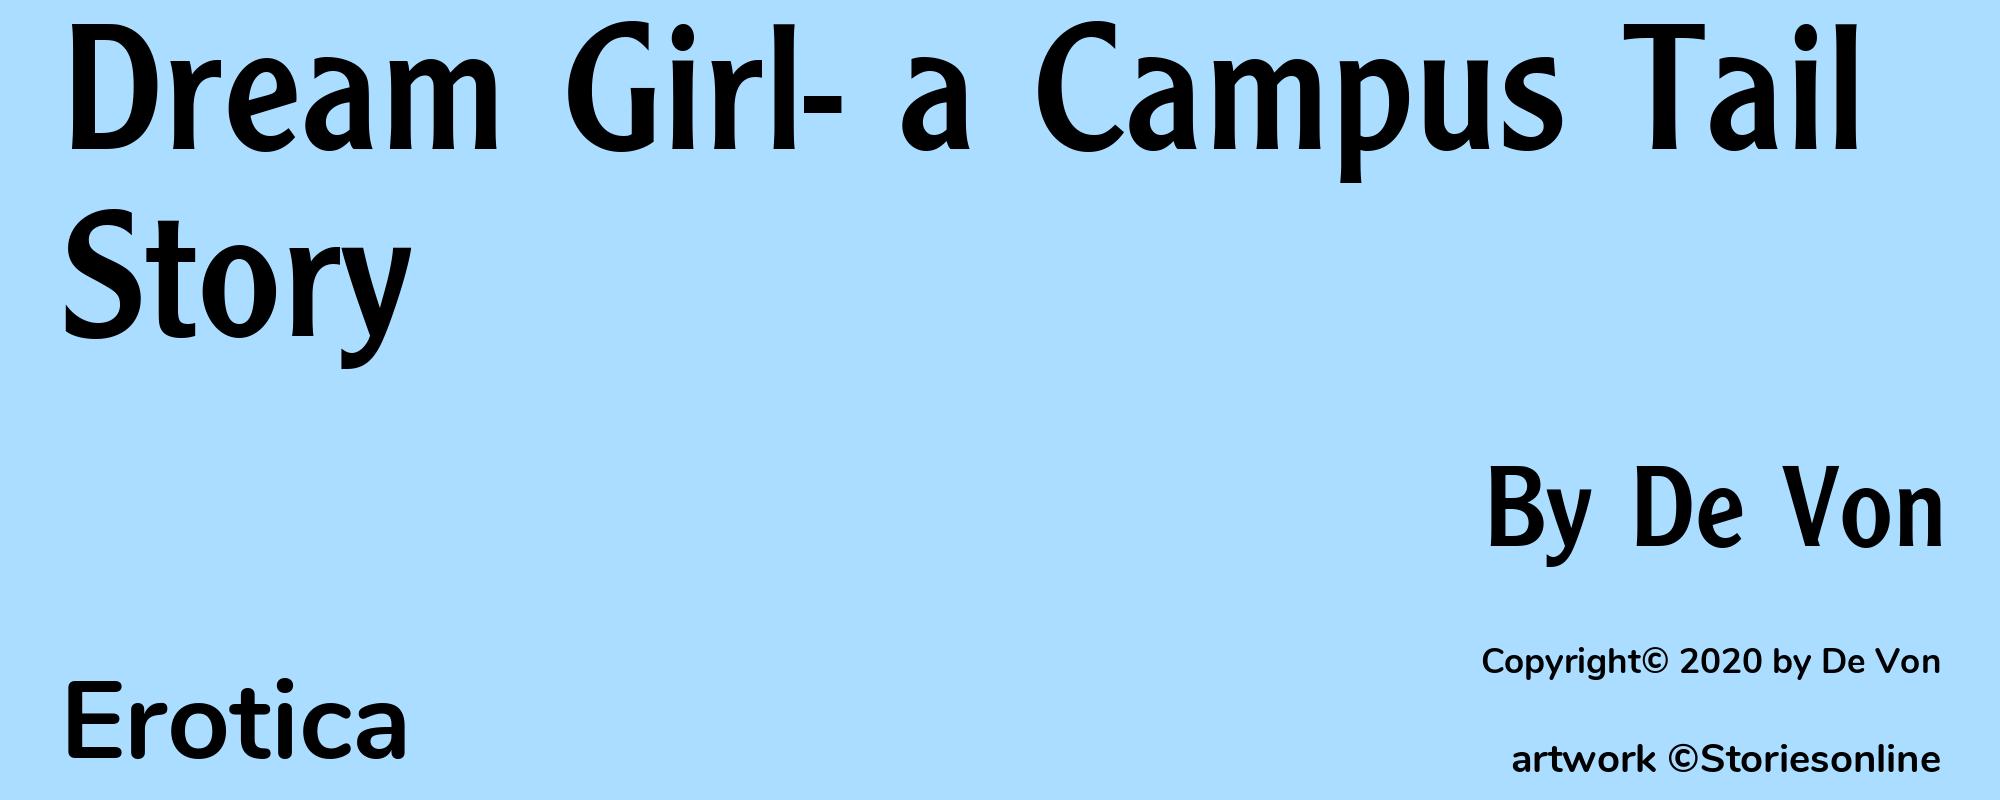 Dream Girl- a Campus Tail Story - Cover